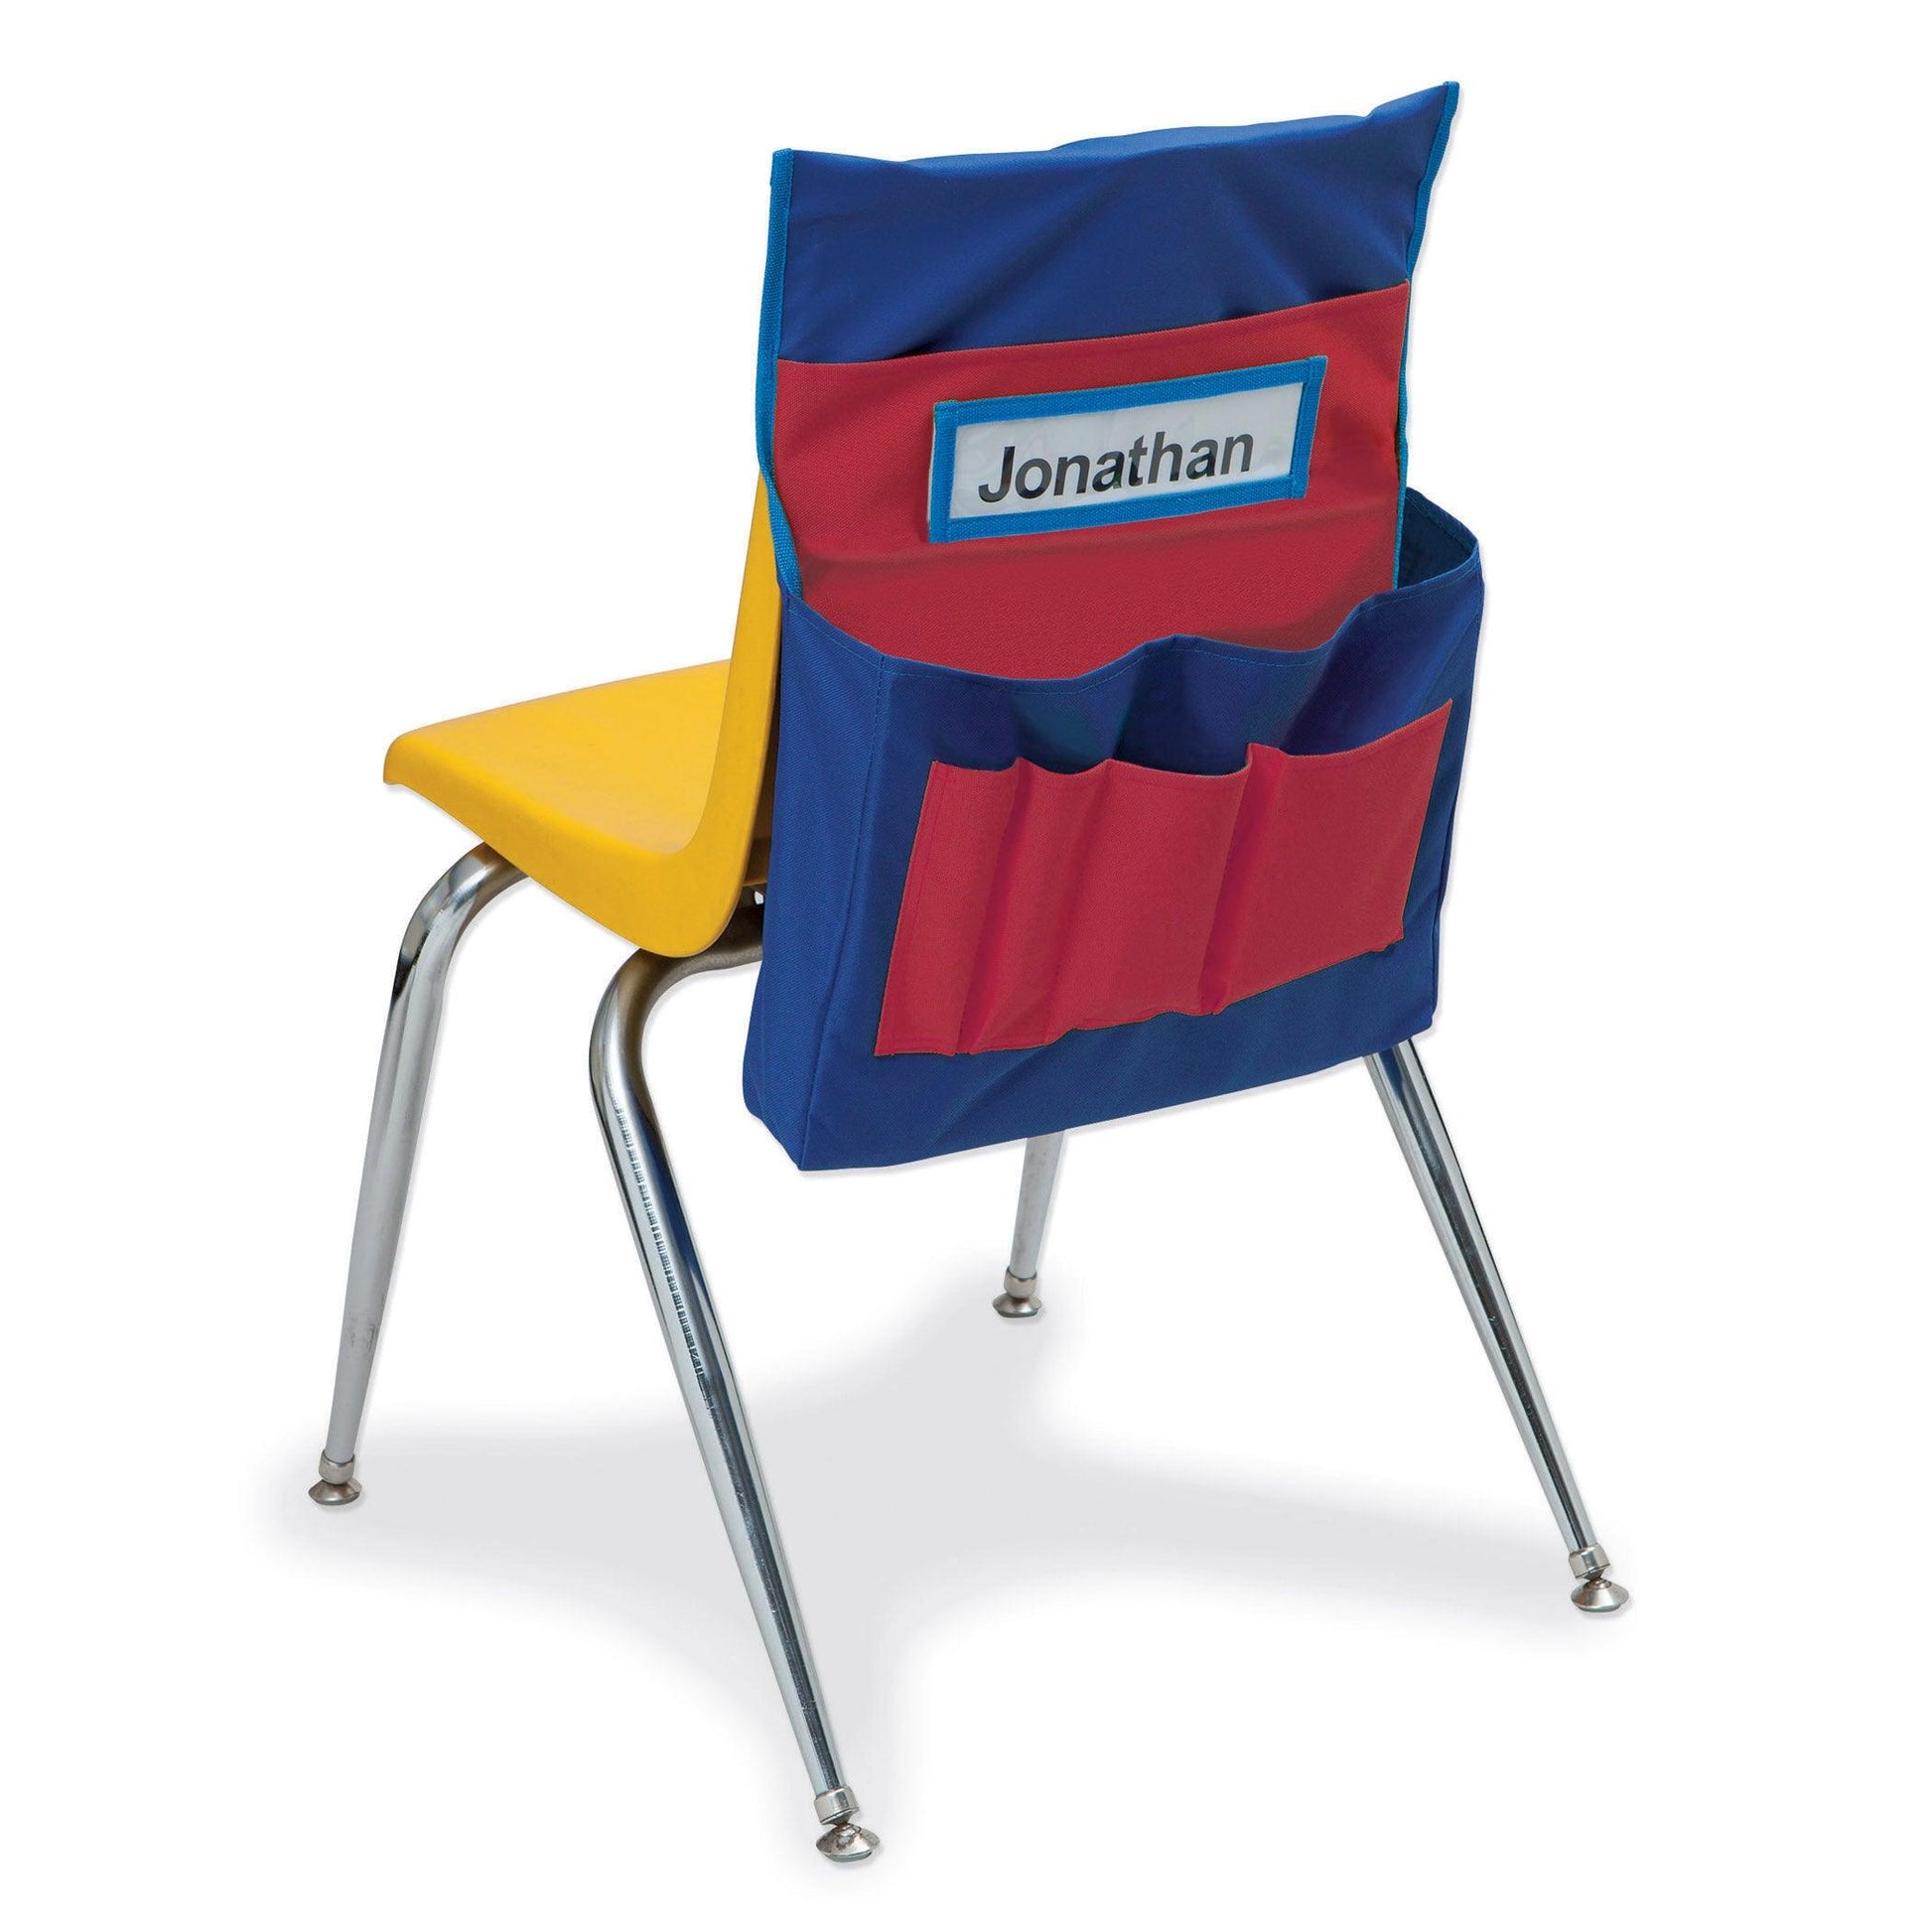 Chair Storage Pocket Chart, Blue & Red, 18-1/2"H x 14-1/2"W x 2-1/2"D, Pack of 2 - Loomini